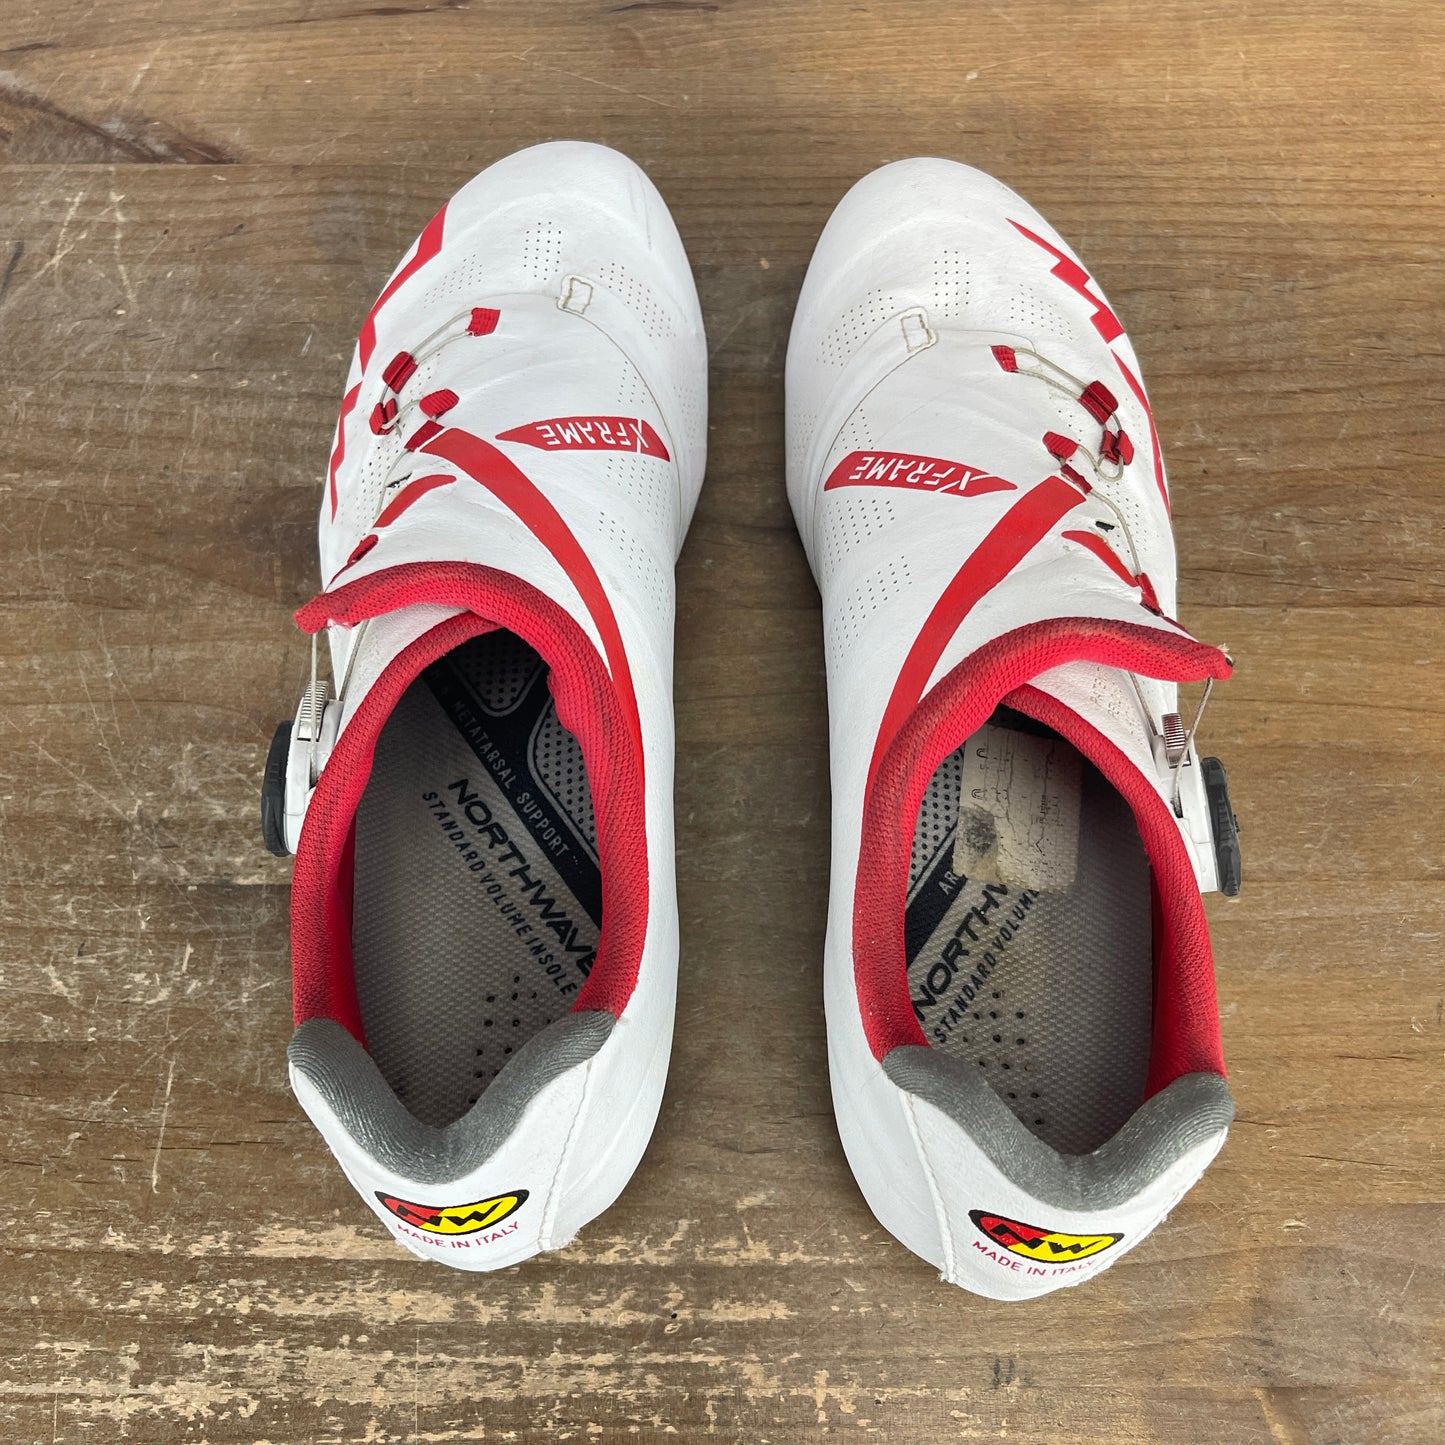 Northwave Extreme RR 42 EU Red/White Road Bike 3-Bolt Cycling Shoes